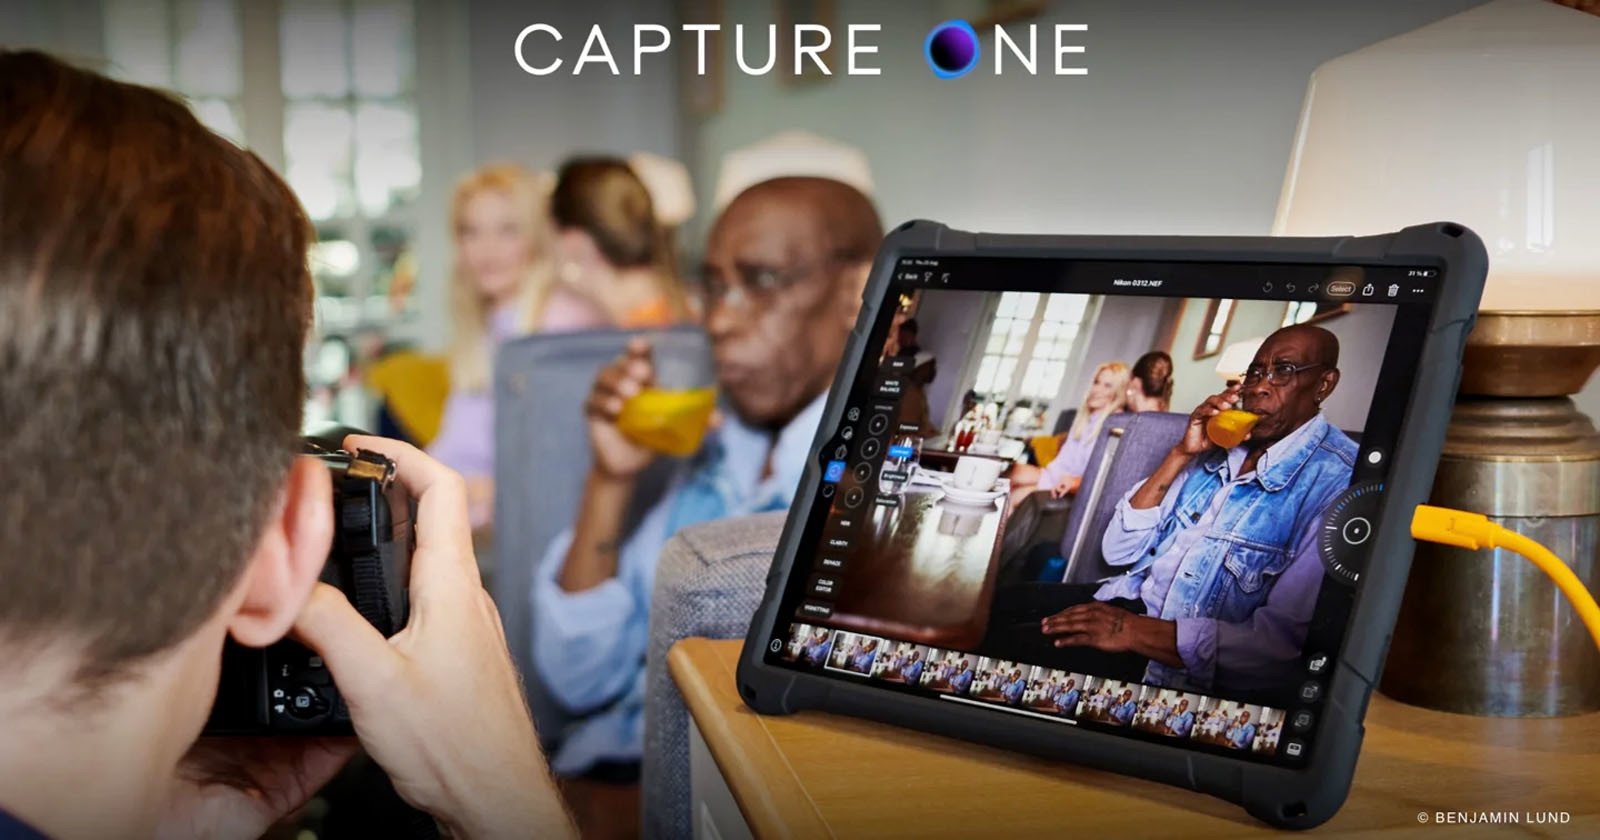 Capture One Adds Wired or